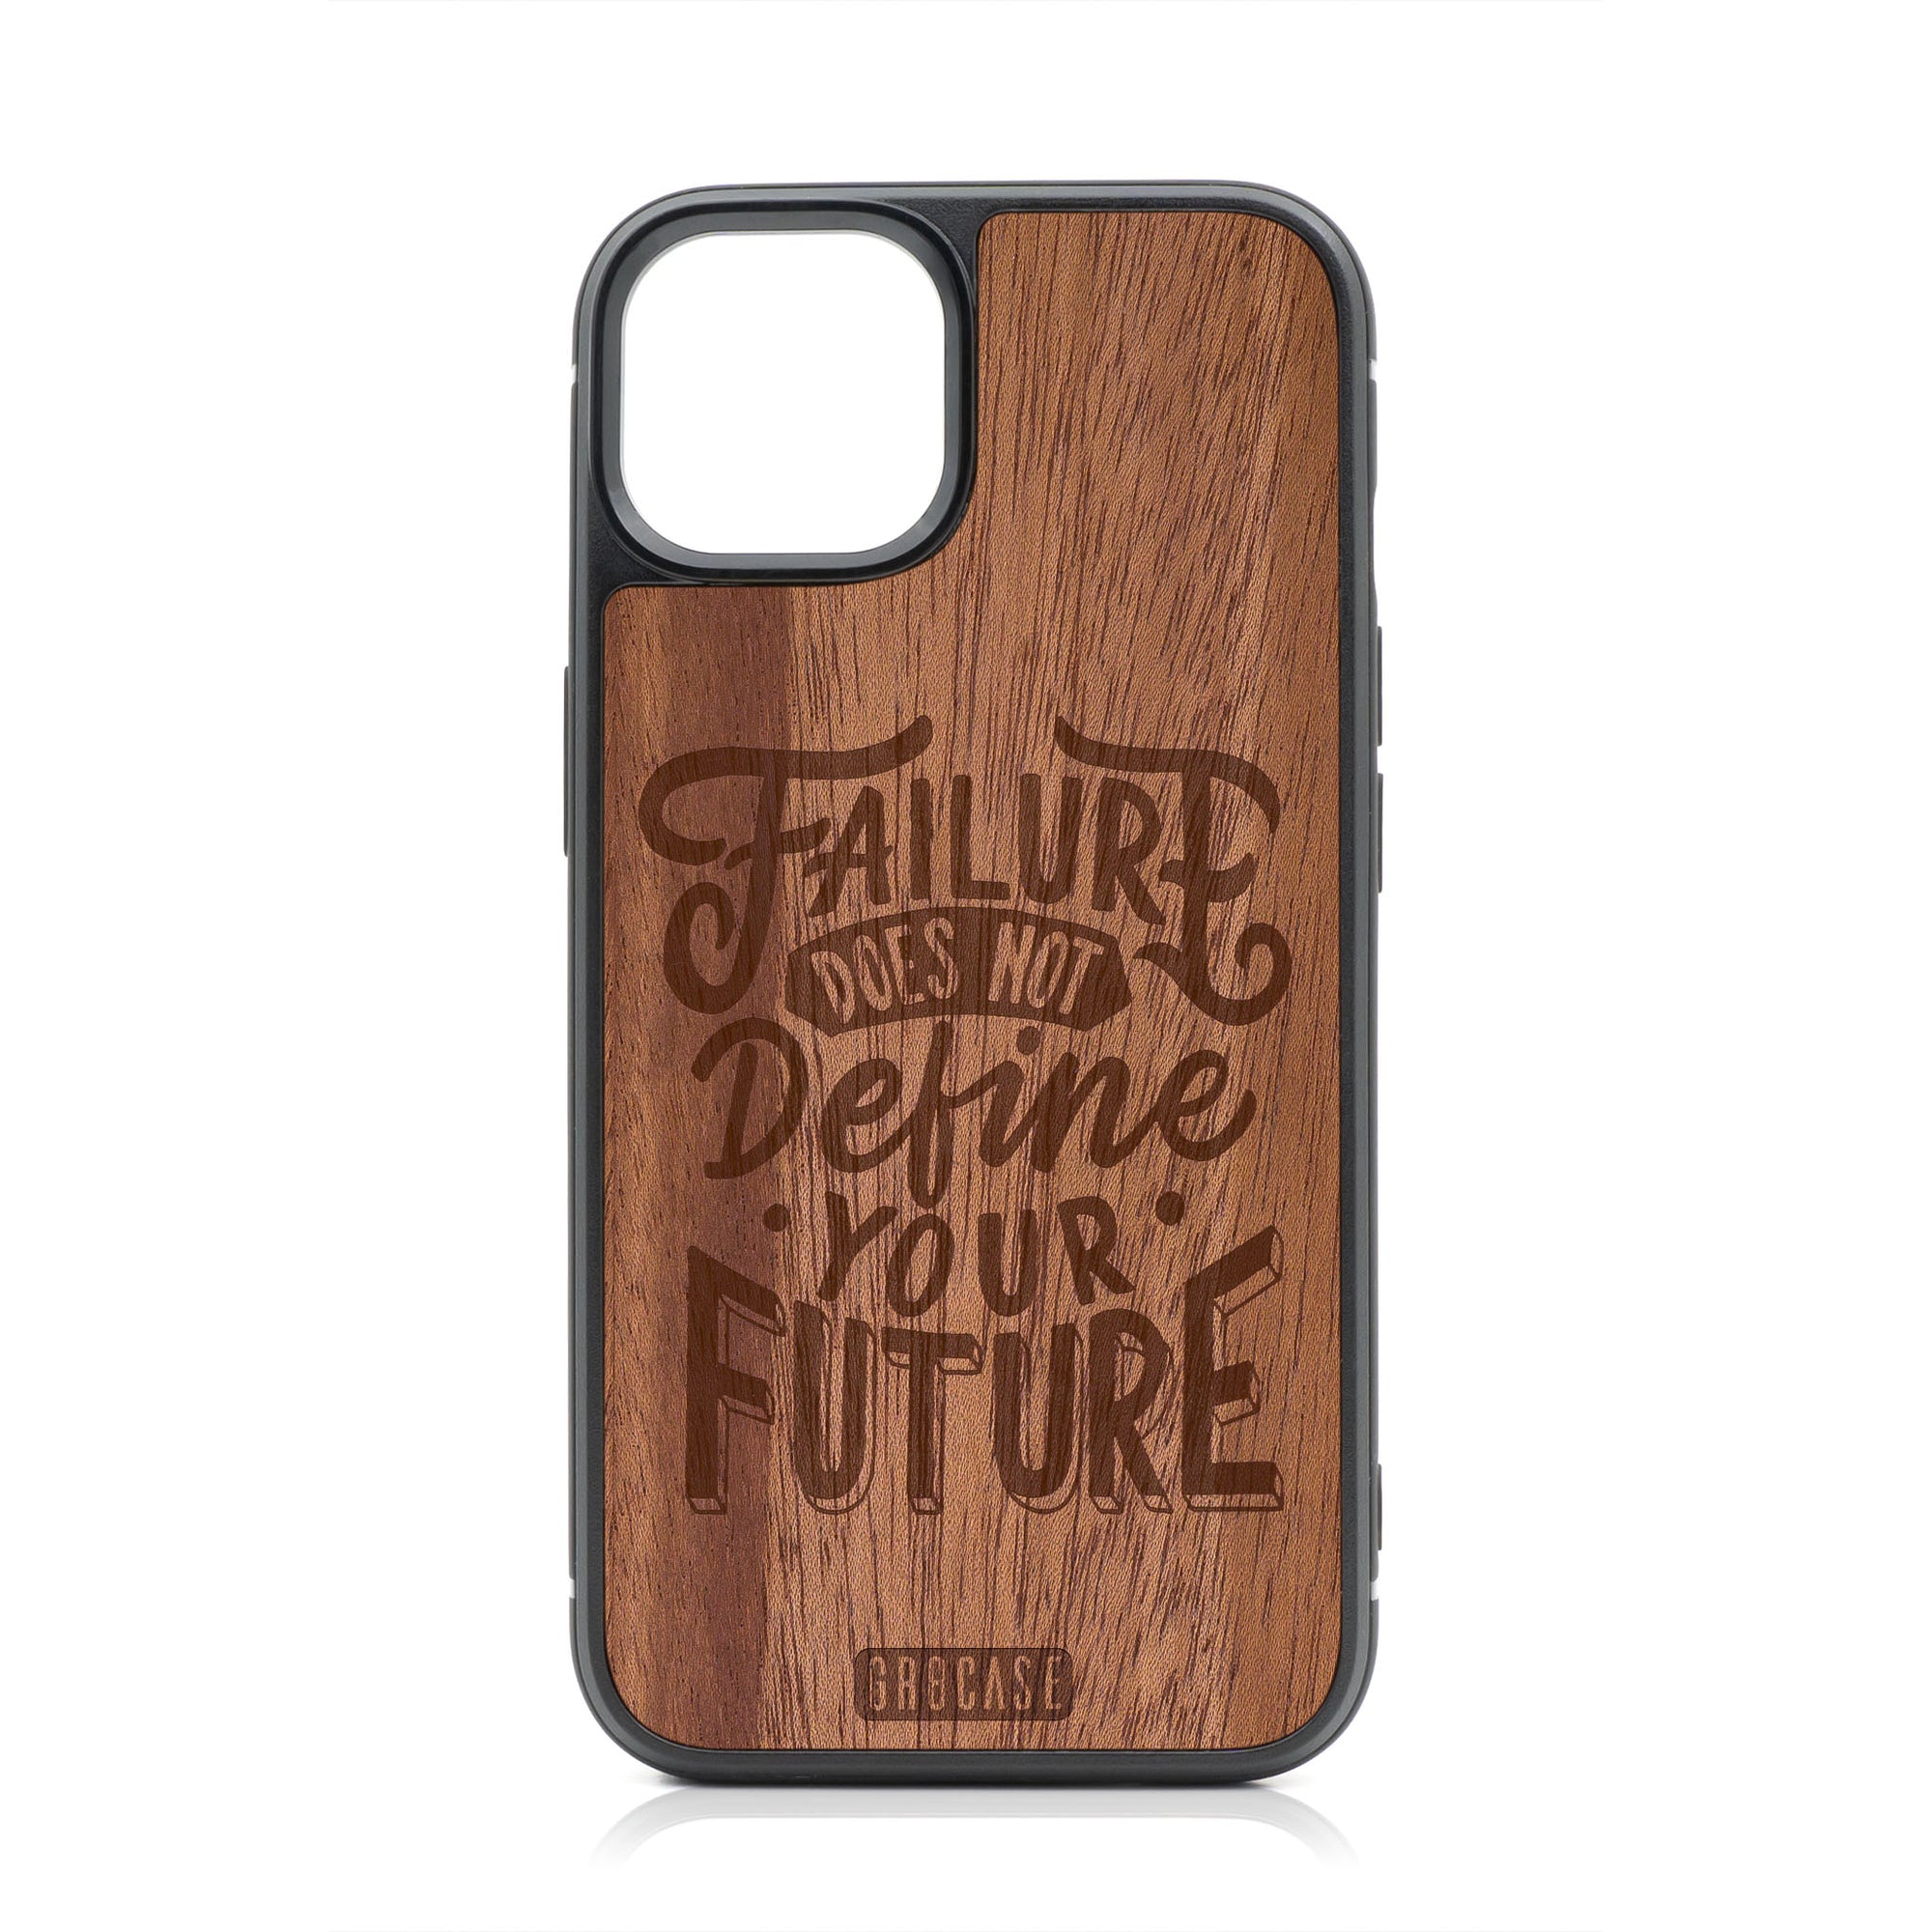 Failure Does Not Define Your Future Design Wood Case For iPhone 13